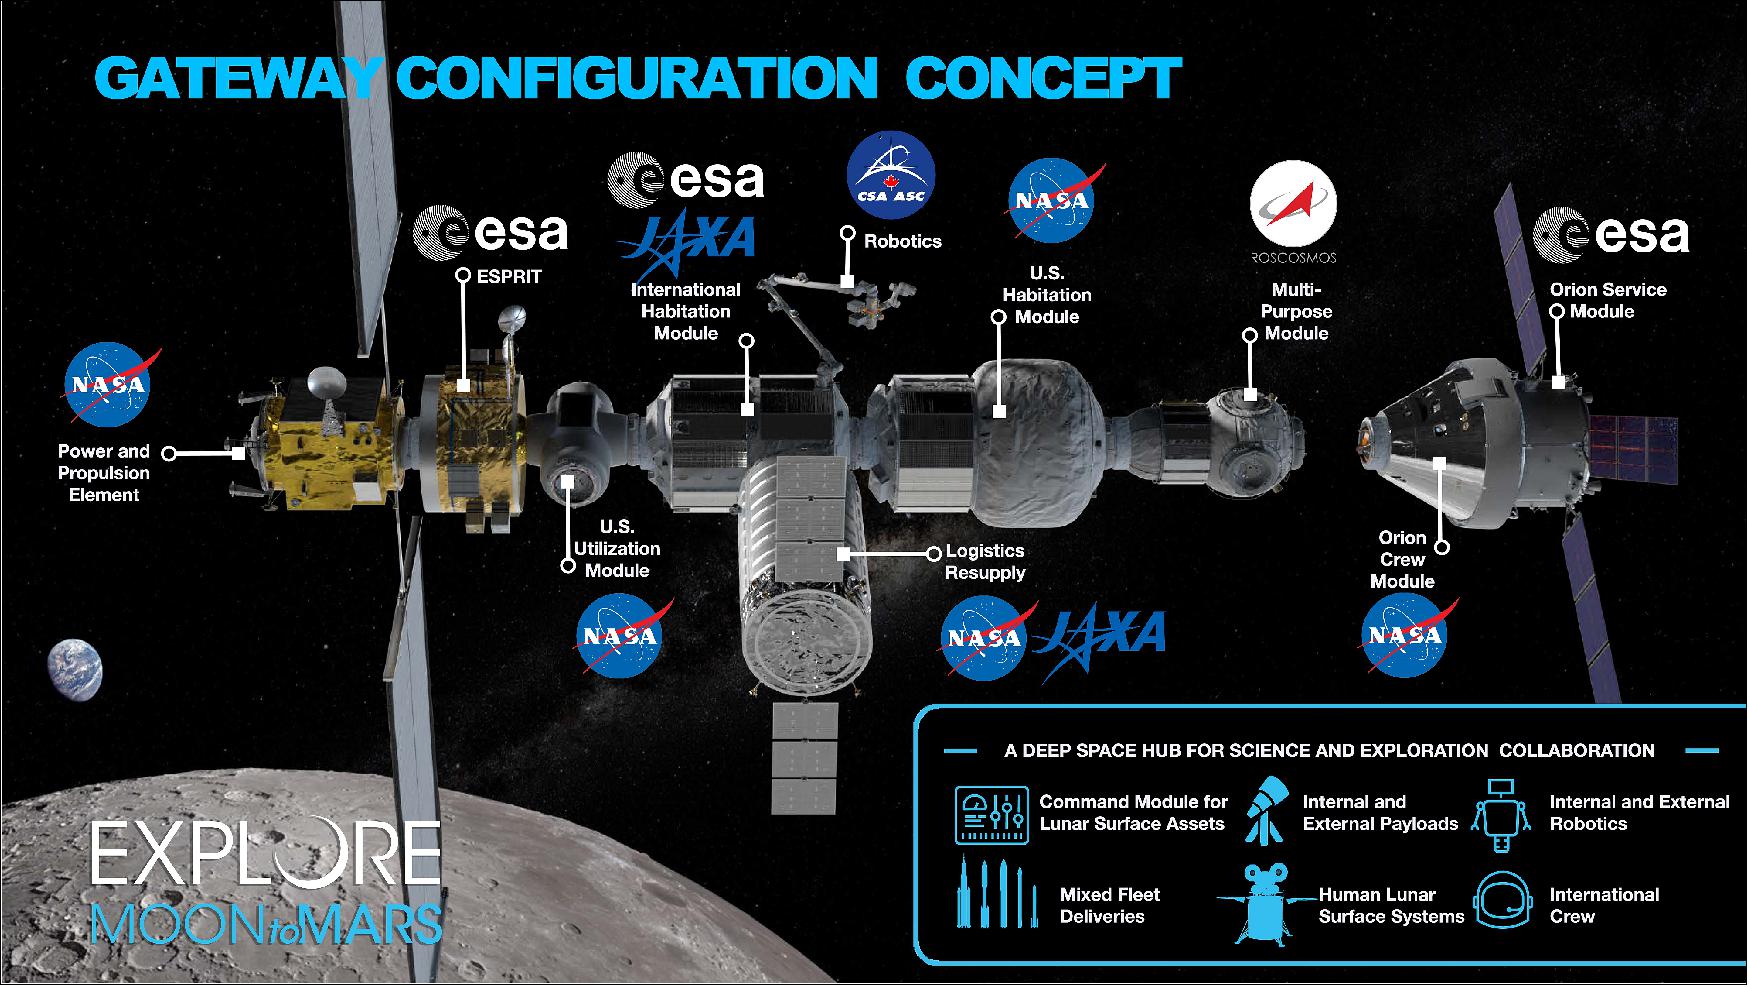 Figure 24: The MCB members from the United States, Canada, Europe, Japan, and Russia discussed their common interest in deploying a human outpost in the lunar vicinity as the next step, a Gateway that will serve as a way station for exploring the surface of the Moon. The MCB endorsed plans to continue developing the Gateway and welcomed each Agency's intention to seek the necessary approvals for providing the elements, modules and capabilities shown in this graphic concept for Gateway configuration (image credit: NASA)